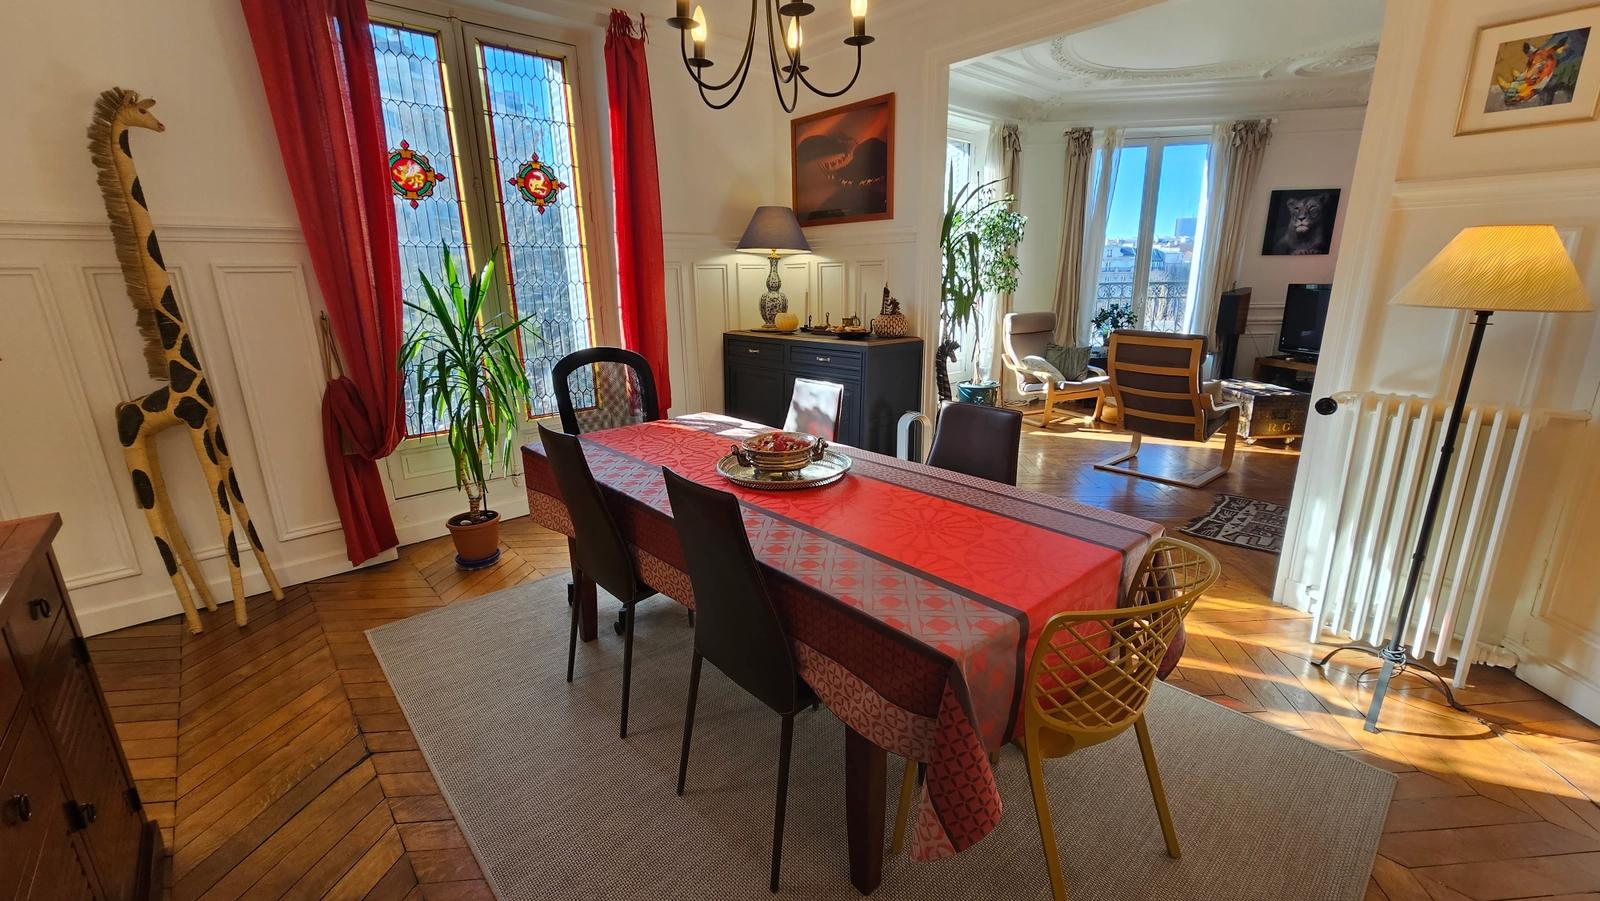 Meeting room in Haussmannian apartment with exotic decor - 1